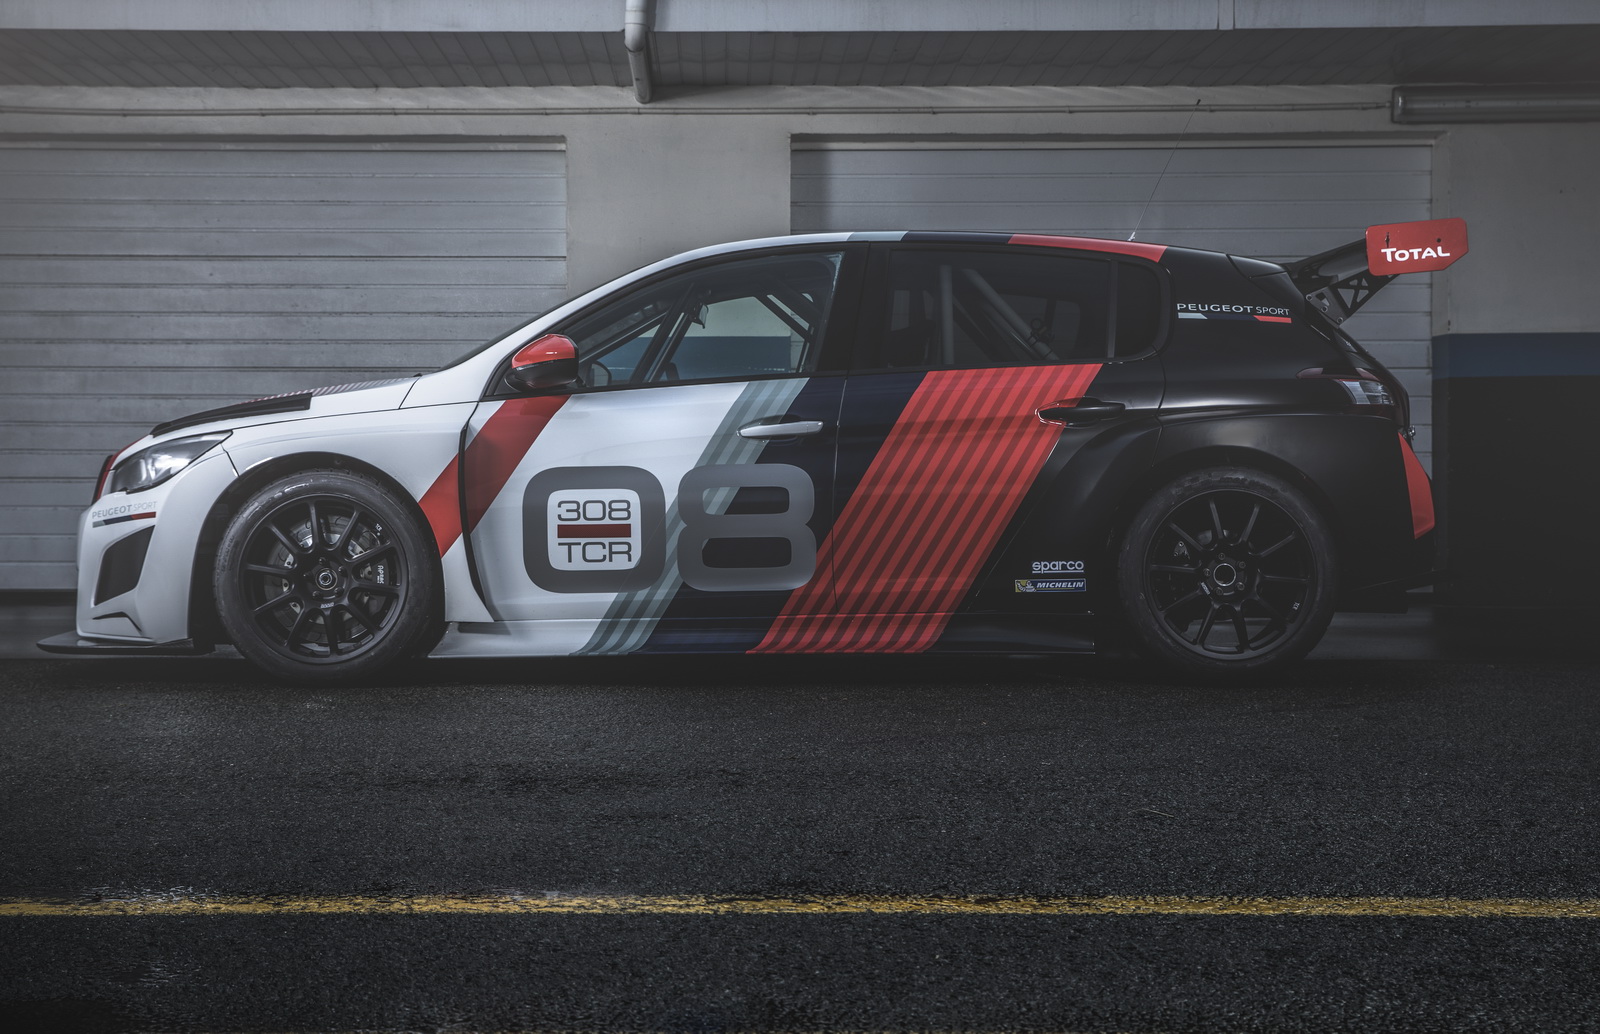 Peugeot Sport break into TCR with new 308 